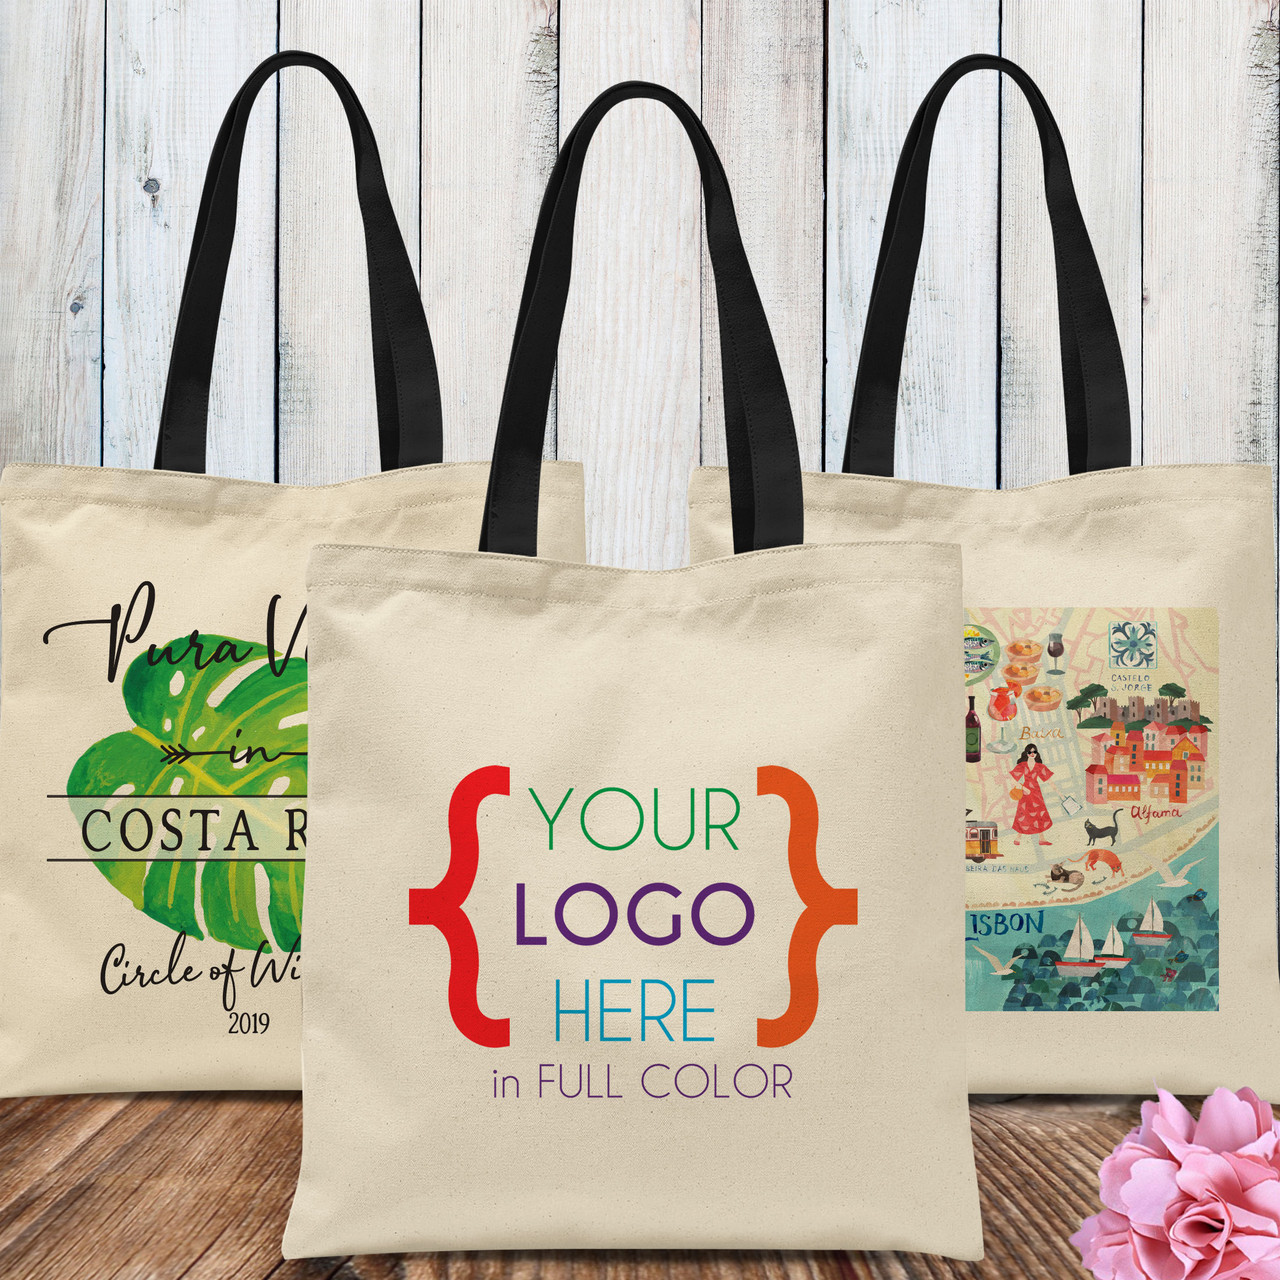 6 MINI Cotton Tote Bag with Fabric Handles,Promotional mini tote bags